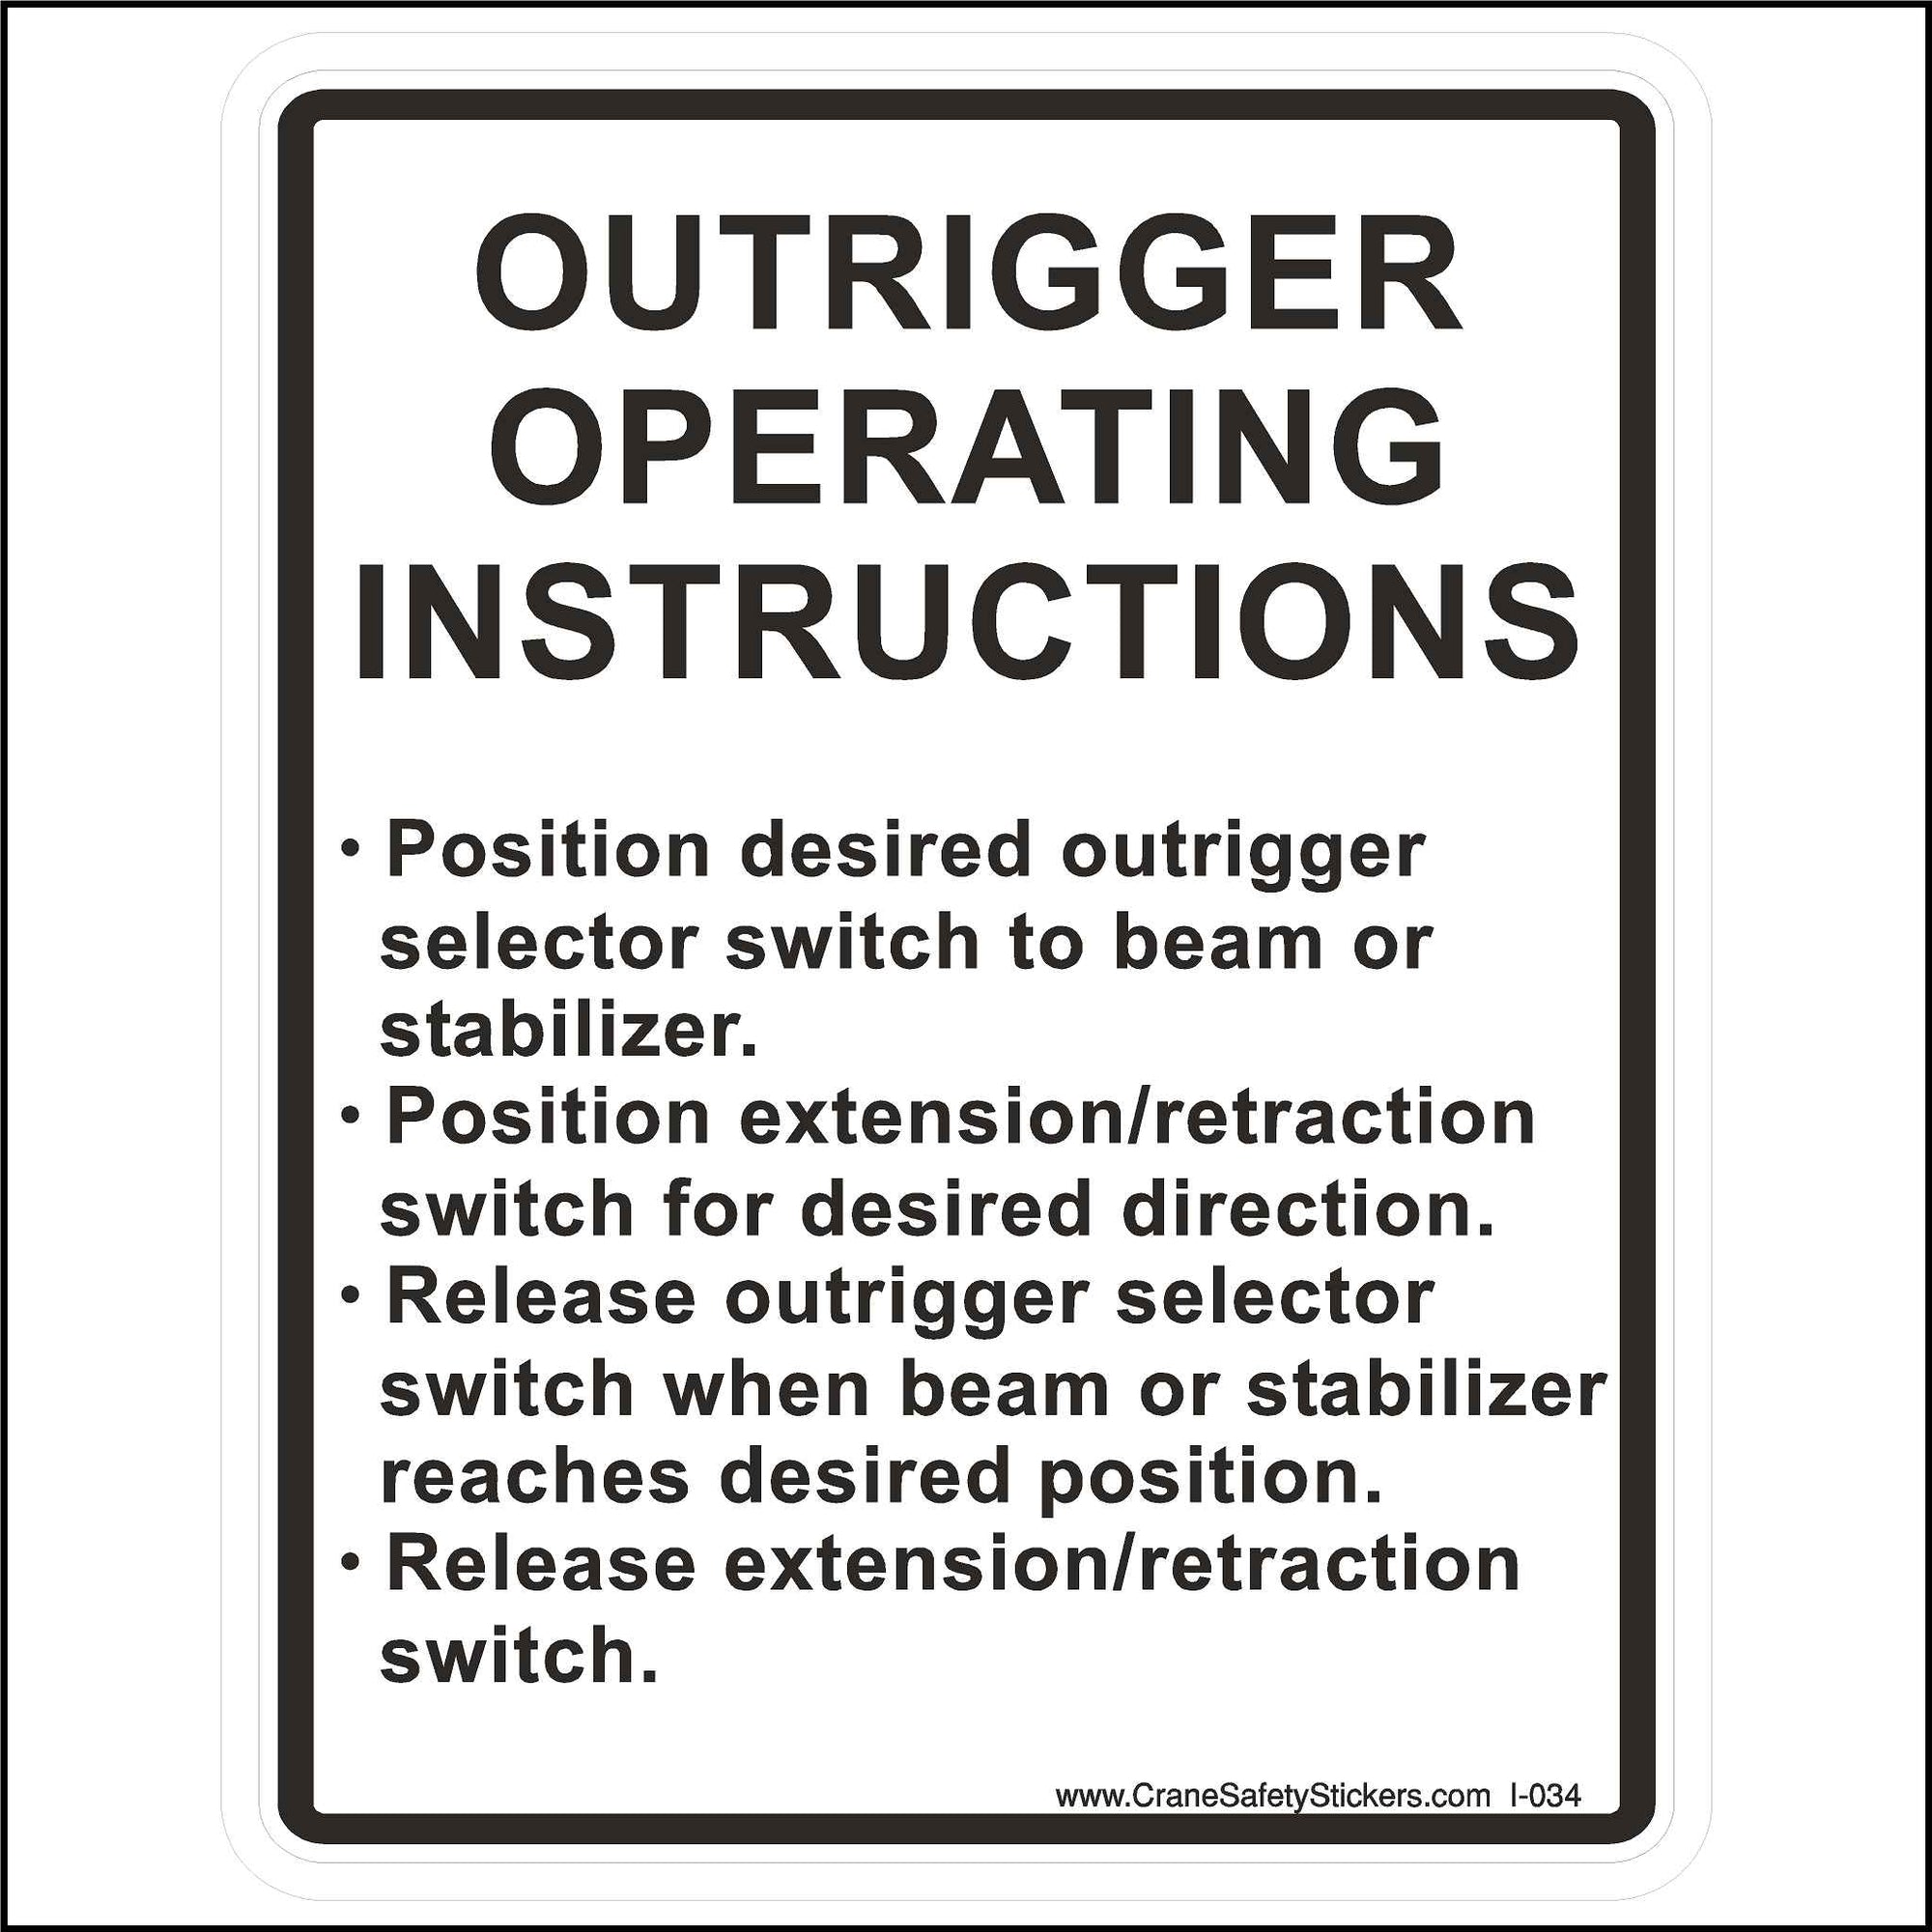 Outrigger Operating Instructions Sticker Printed with. Outrigger Operating instructions  Position desired outrigger selector switch to beam or stabilizer.  Position extension/retraction switch for desired direction.  Release outrigger selector switch when beam or stabilizer reaches desired position.  Release extension/retraction switch.